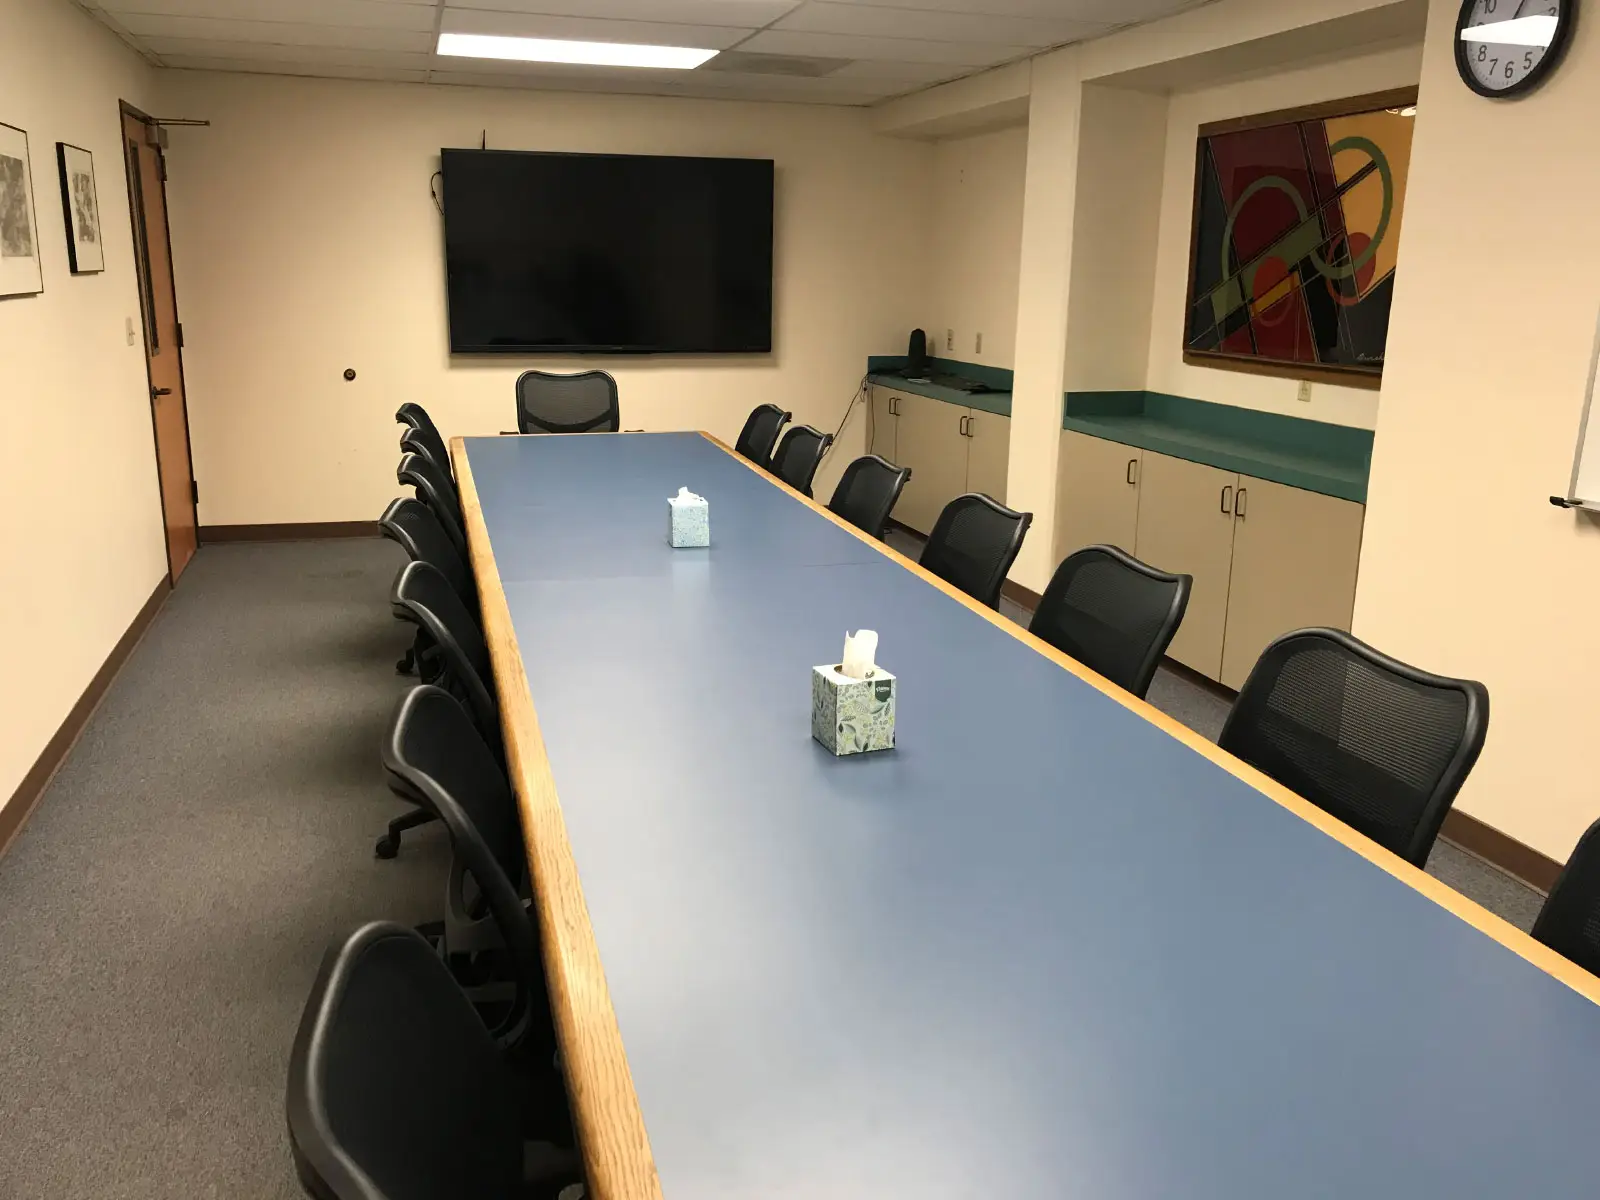 A long, blue table with several chairs in a conference room with a TV display on the Oregon City campus